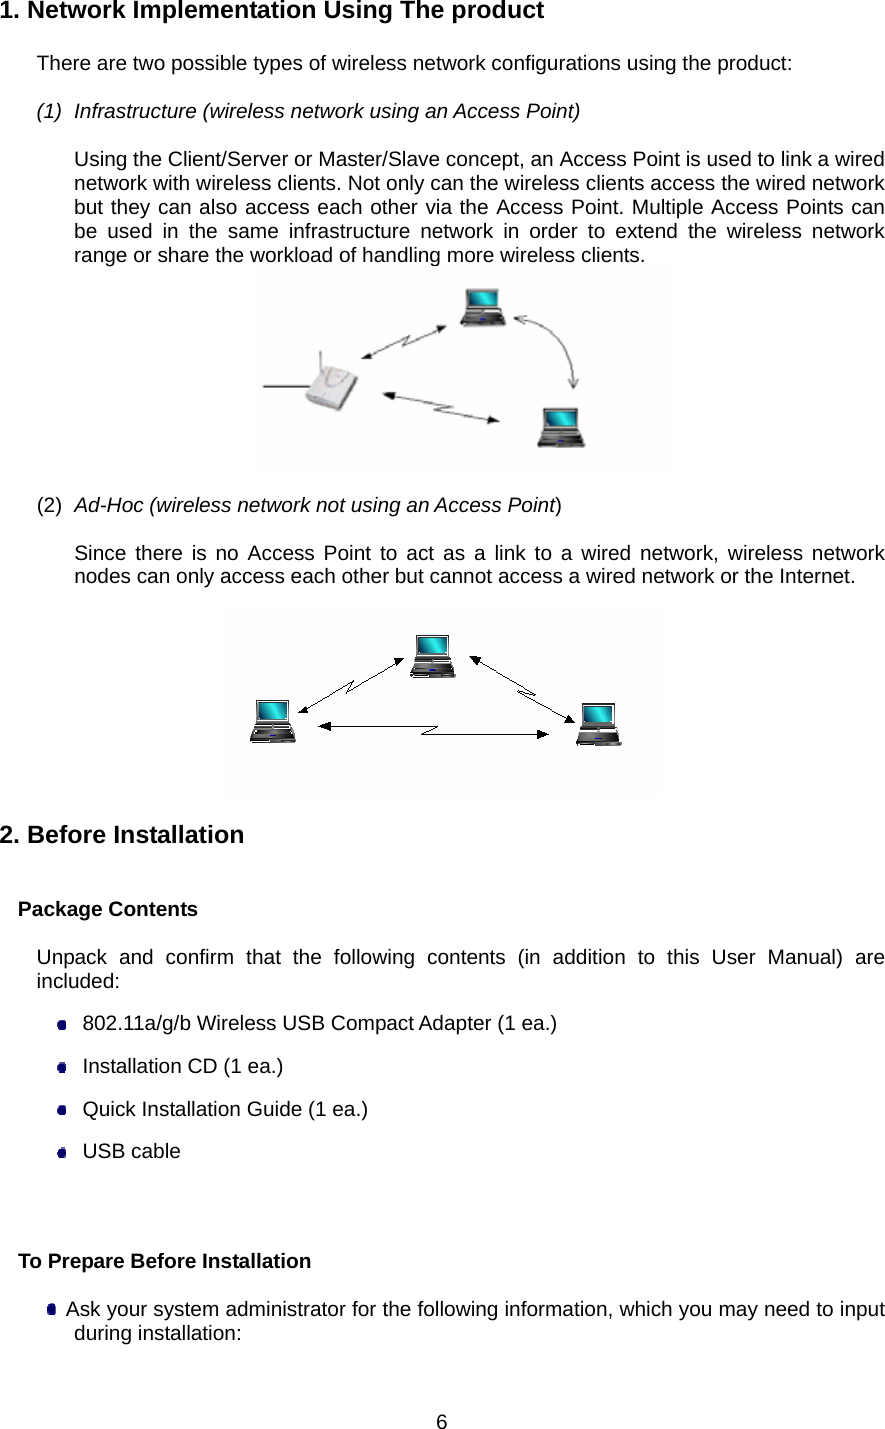  6 1. Network Implementation Using The product  There are two possible types of wireless network configurations using the product:  (1)  Infrastructure (wireless network using an Access Point)  Using the Client/Server or Master/Slave concept, an Access Point is used to link a wired network with wireless clients. Not only can the wireless clients access the wired network but they can also access each other via the Access Point. Multiple Access Points can be used in the same infrastructure network in order to extend the wireless network range or share the workload of handling more wireless clients.   (2)  Ad-Hoc (wireless network not using an Access Point)  Since there is no Access Point to act as a link to a wired network, wireless network nodes can only access each other but cannot access a wired network or the Internet.    2. Before Installation   Package Contents  Unpack and confirm that the following contents (in addition to this User Manual) are included:   802.11a/g/b Wireless USB Compact Adapter (1 ea.)   Installation CD (1 ea.)   Quick Installation Guide (1 ea.)  USB cable                           To Prepare Before Installation    Ask your system administrator for the following information, which you may need to input during installation: 